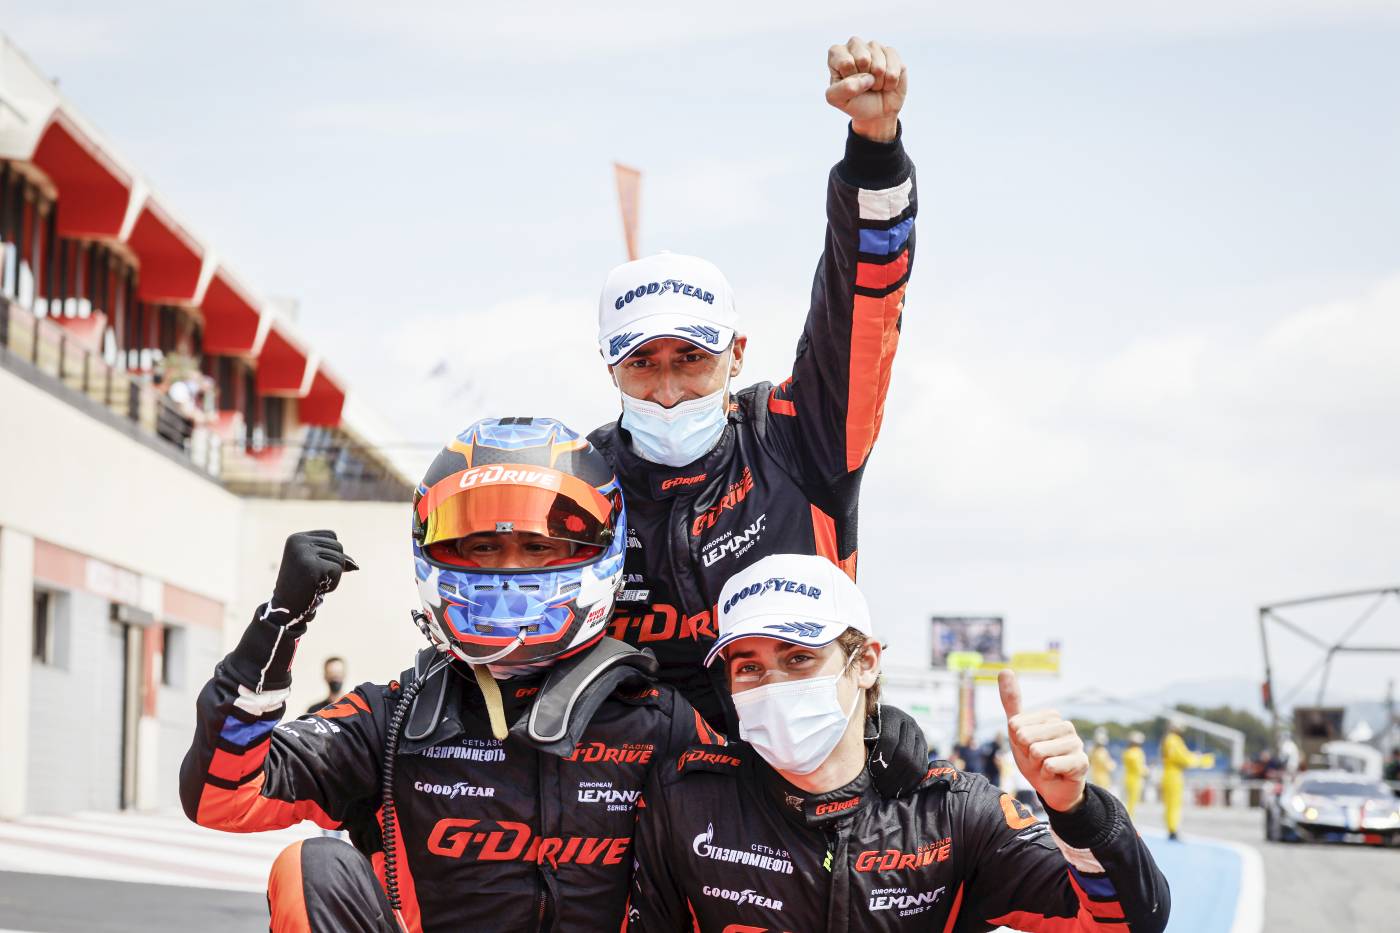 G-Drive Racing back in the championship after winning the 4 Hours of Le Castellet!